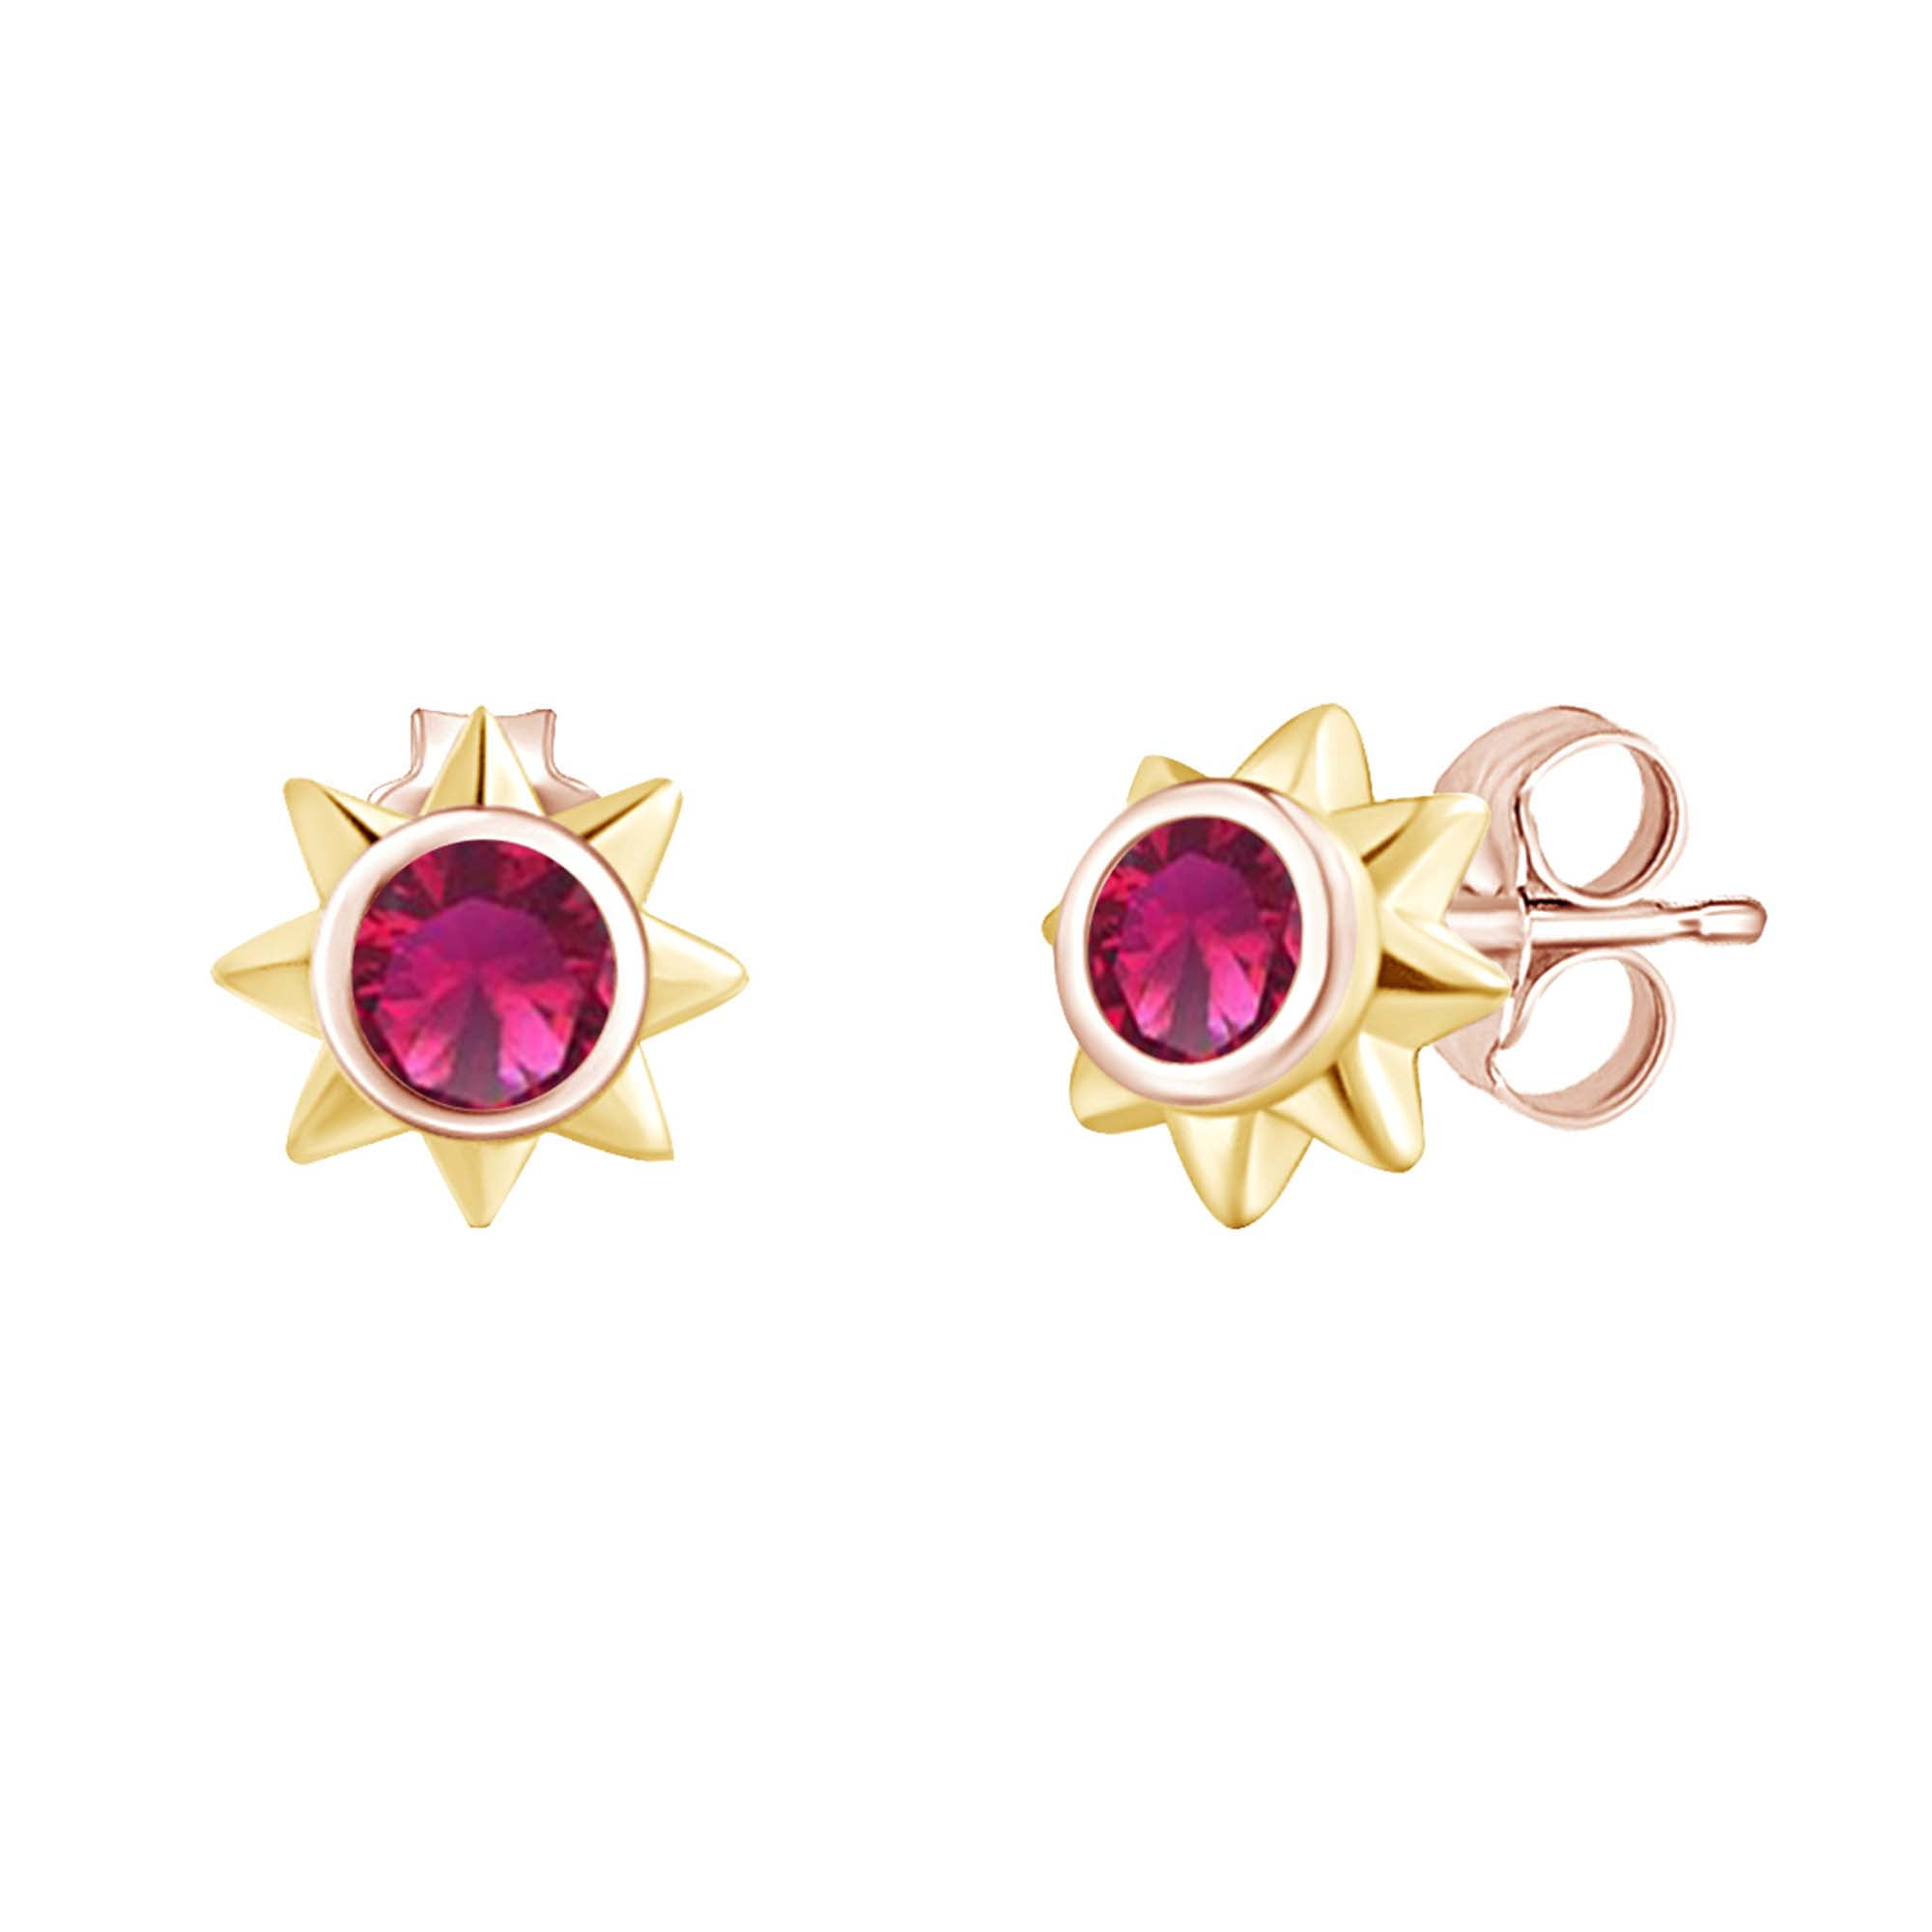 Simulated Garnet Two Stone Stud Earrings 14K Rose Gold Over Sterling Silver